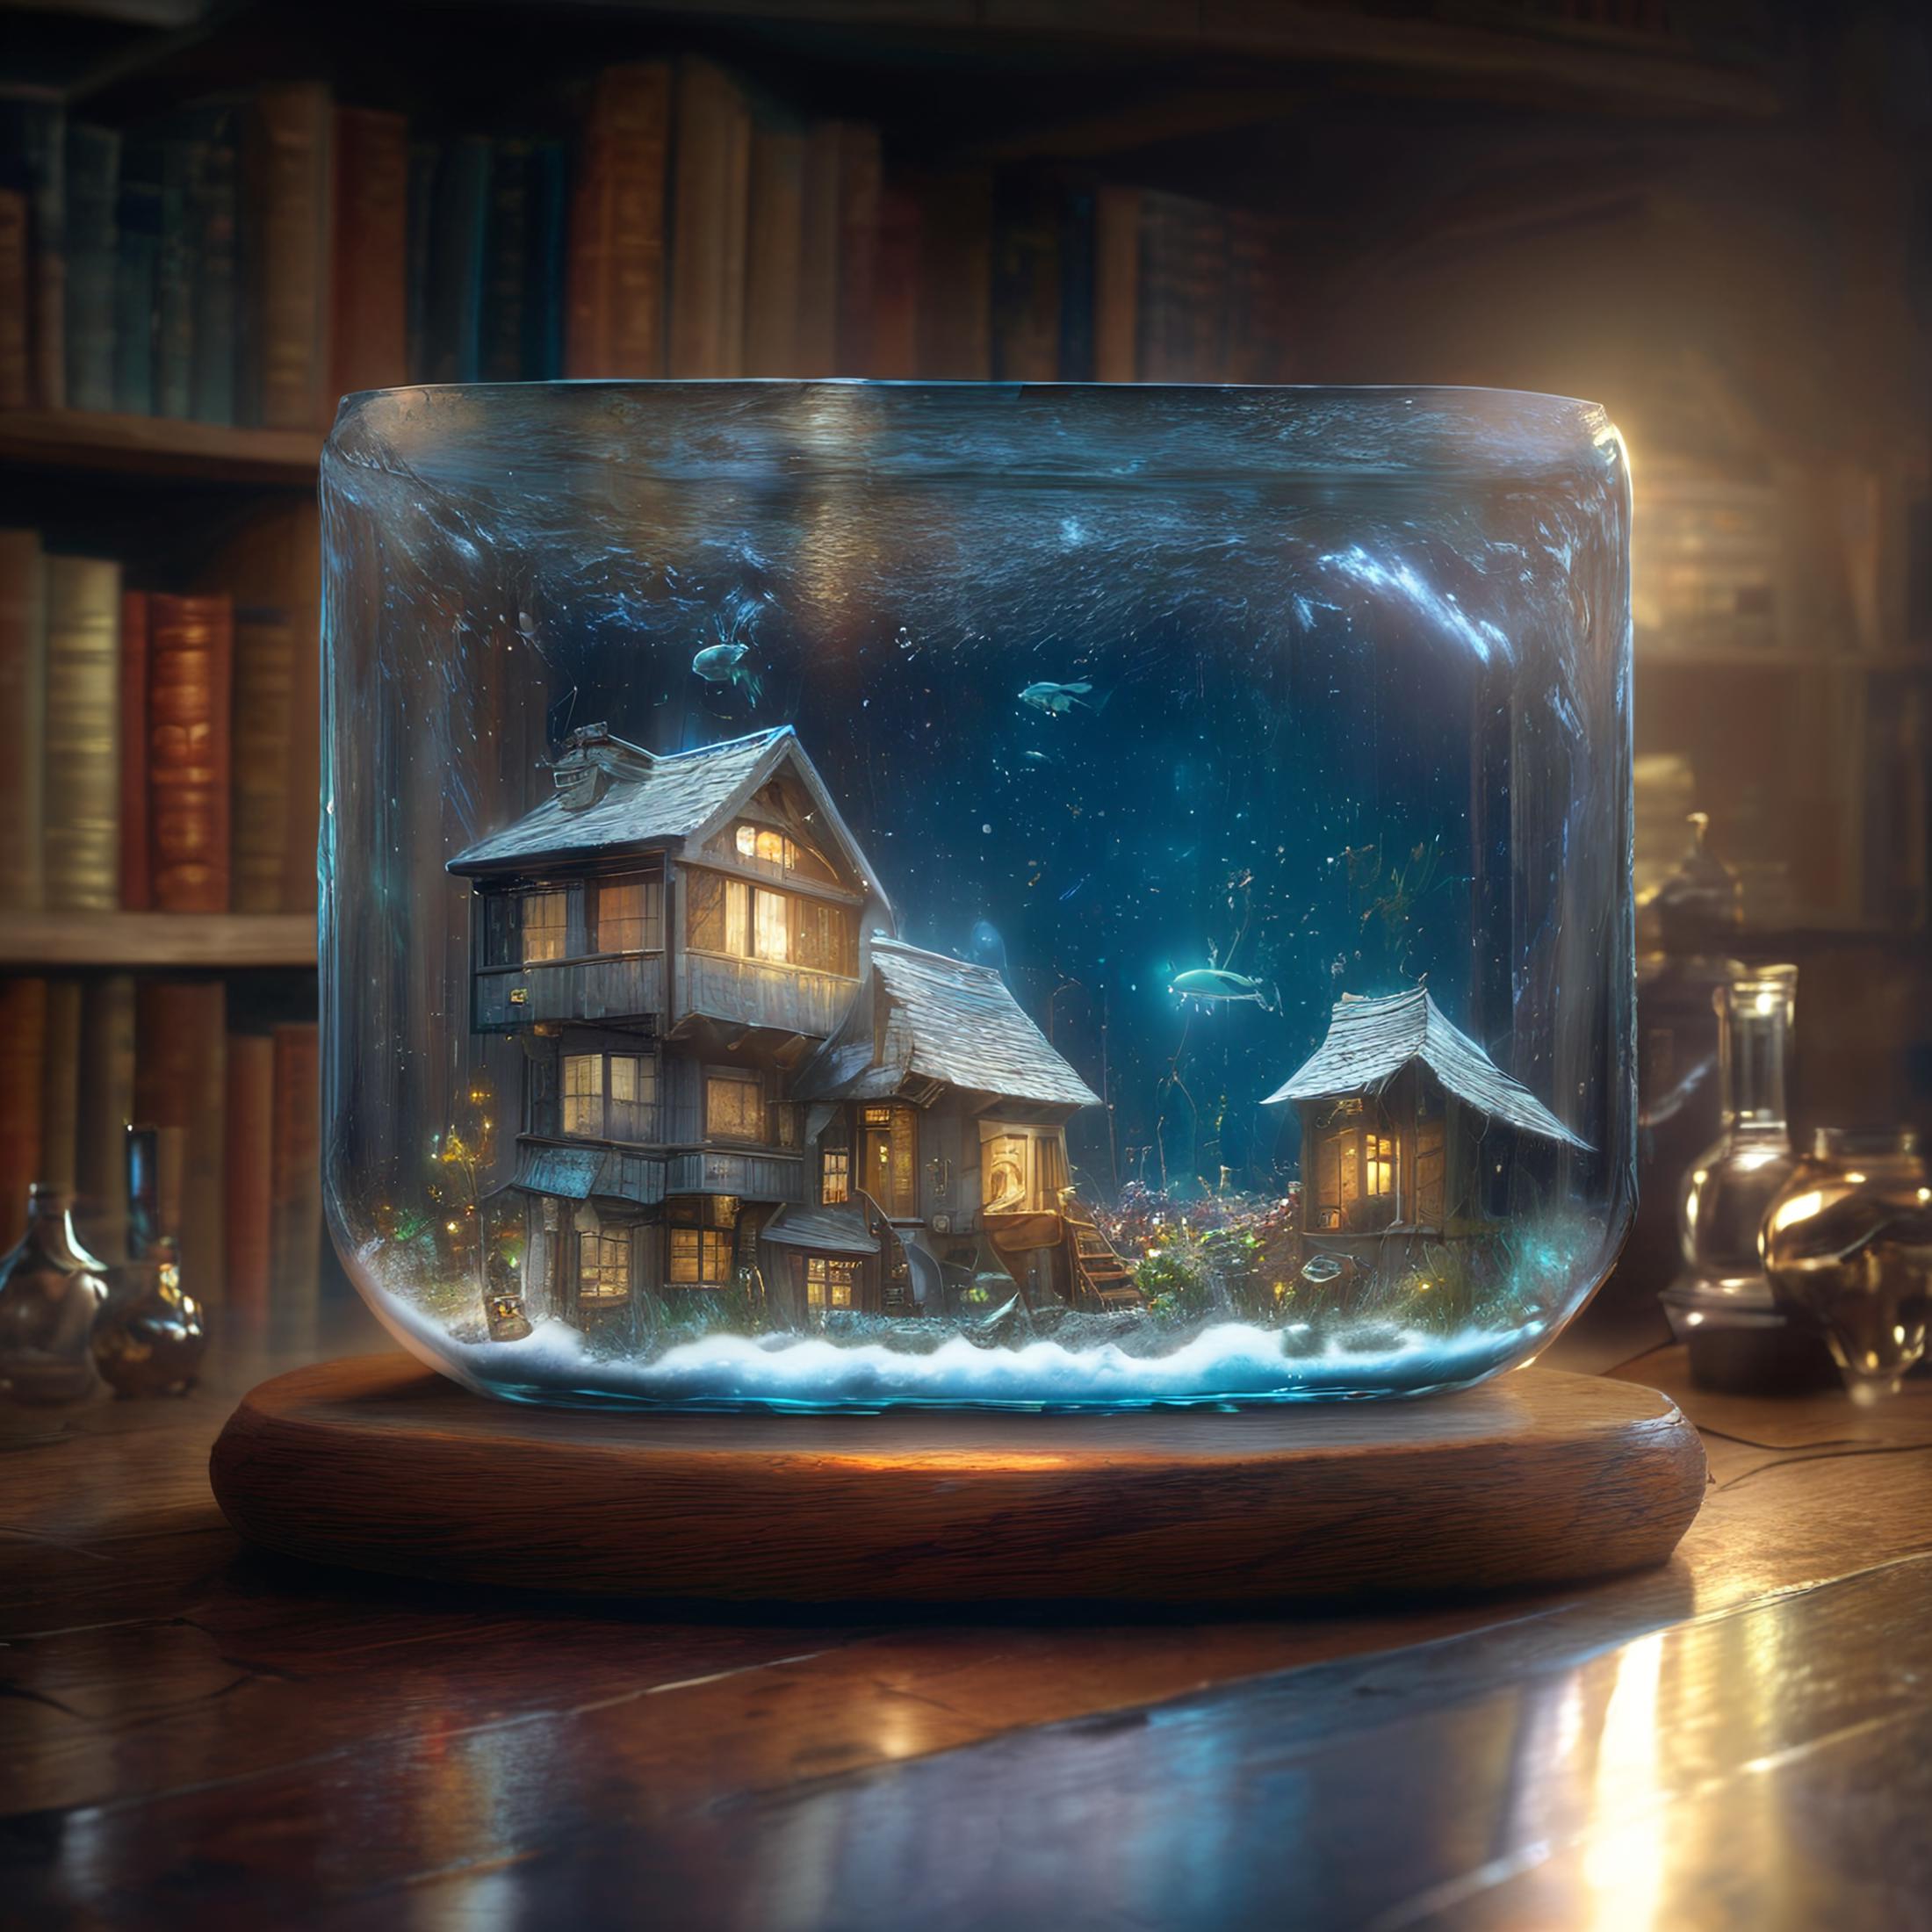 A model house in a fishbowl.